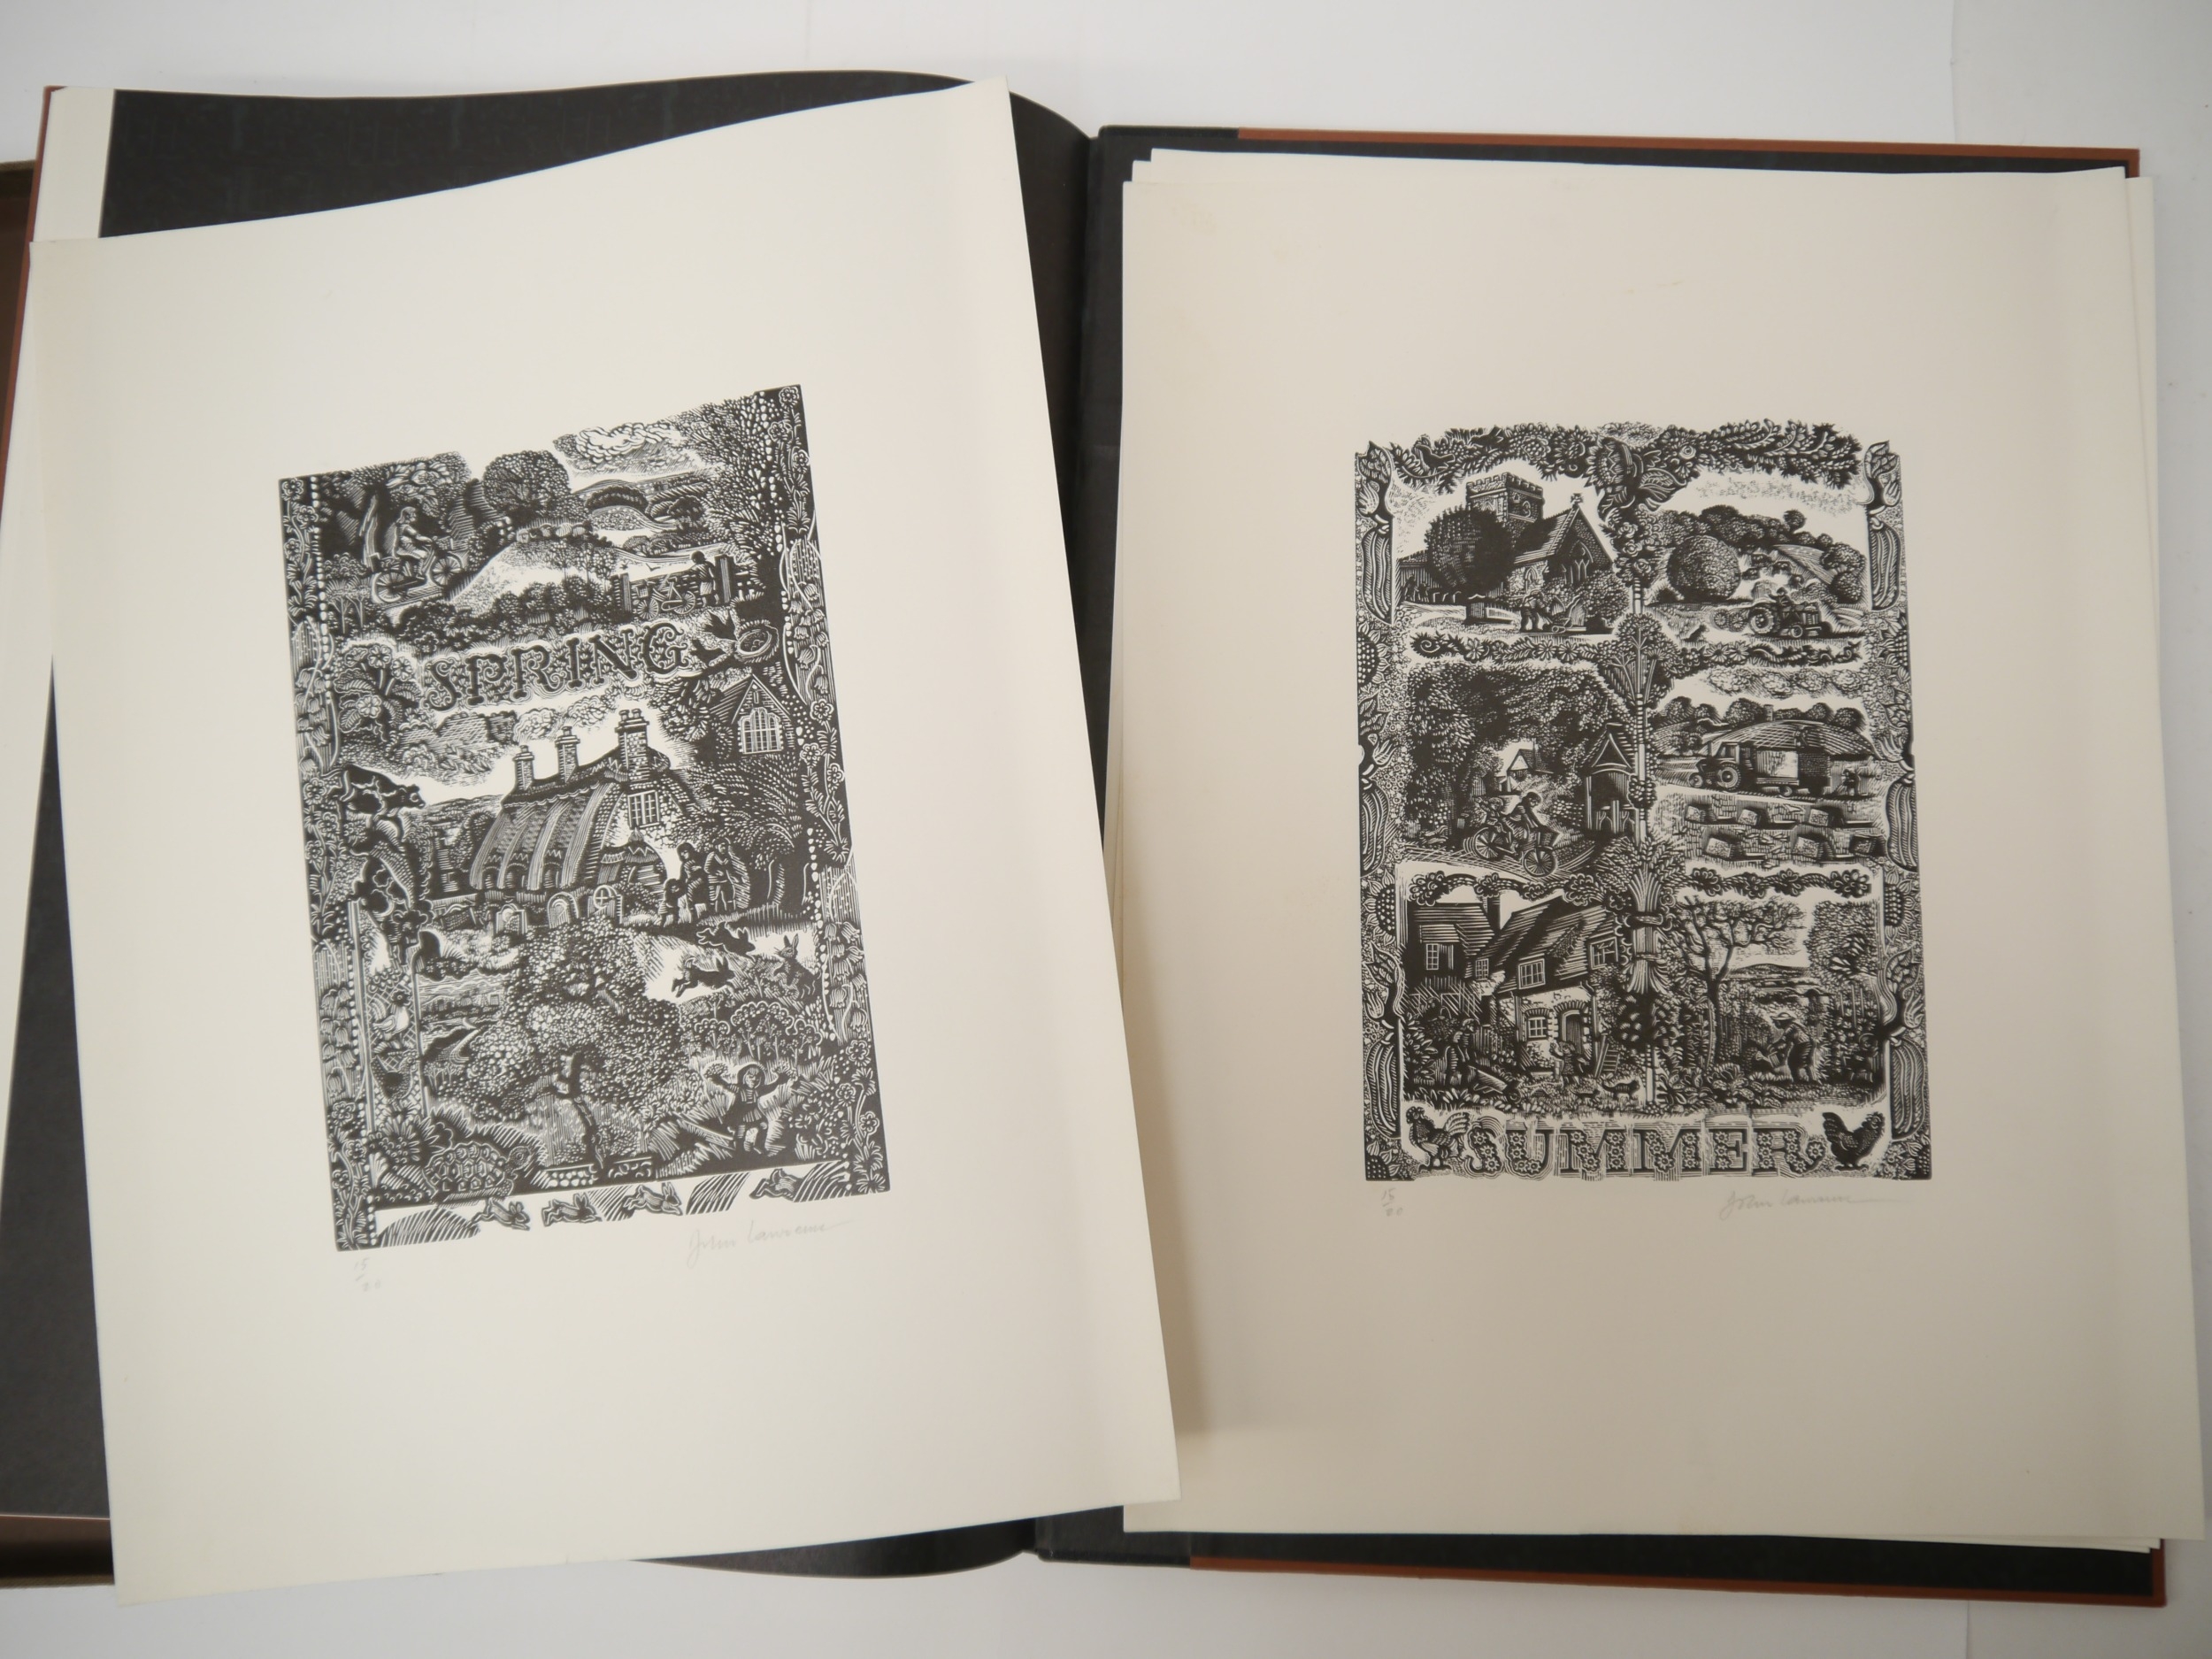 John Lawrence: 'A Selection of Wood Engravings', London, The Camberwell Press, 1986, limited edition - Image 6 of 7